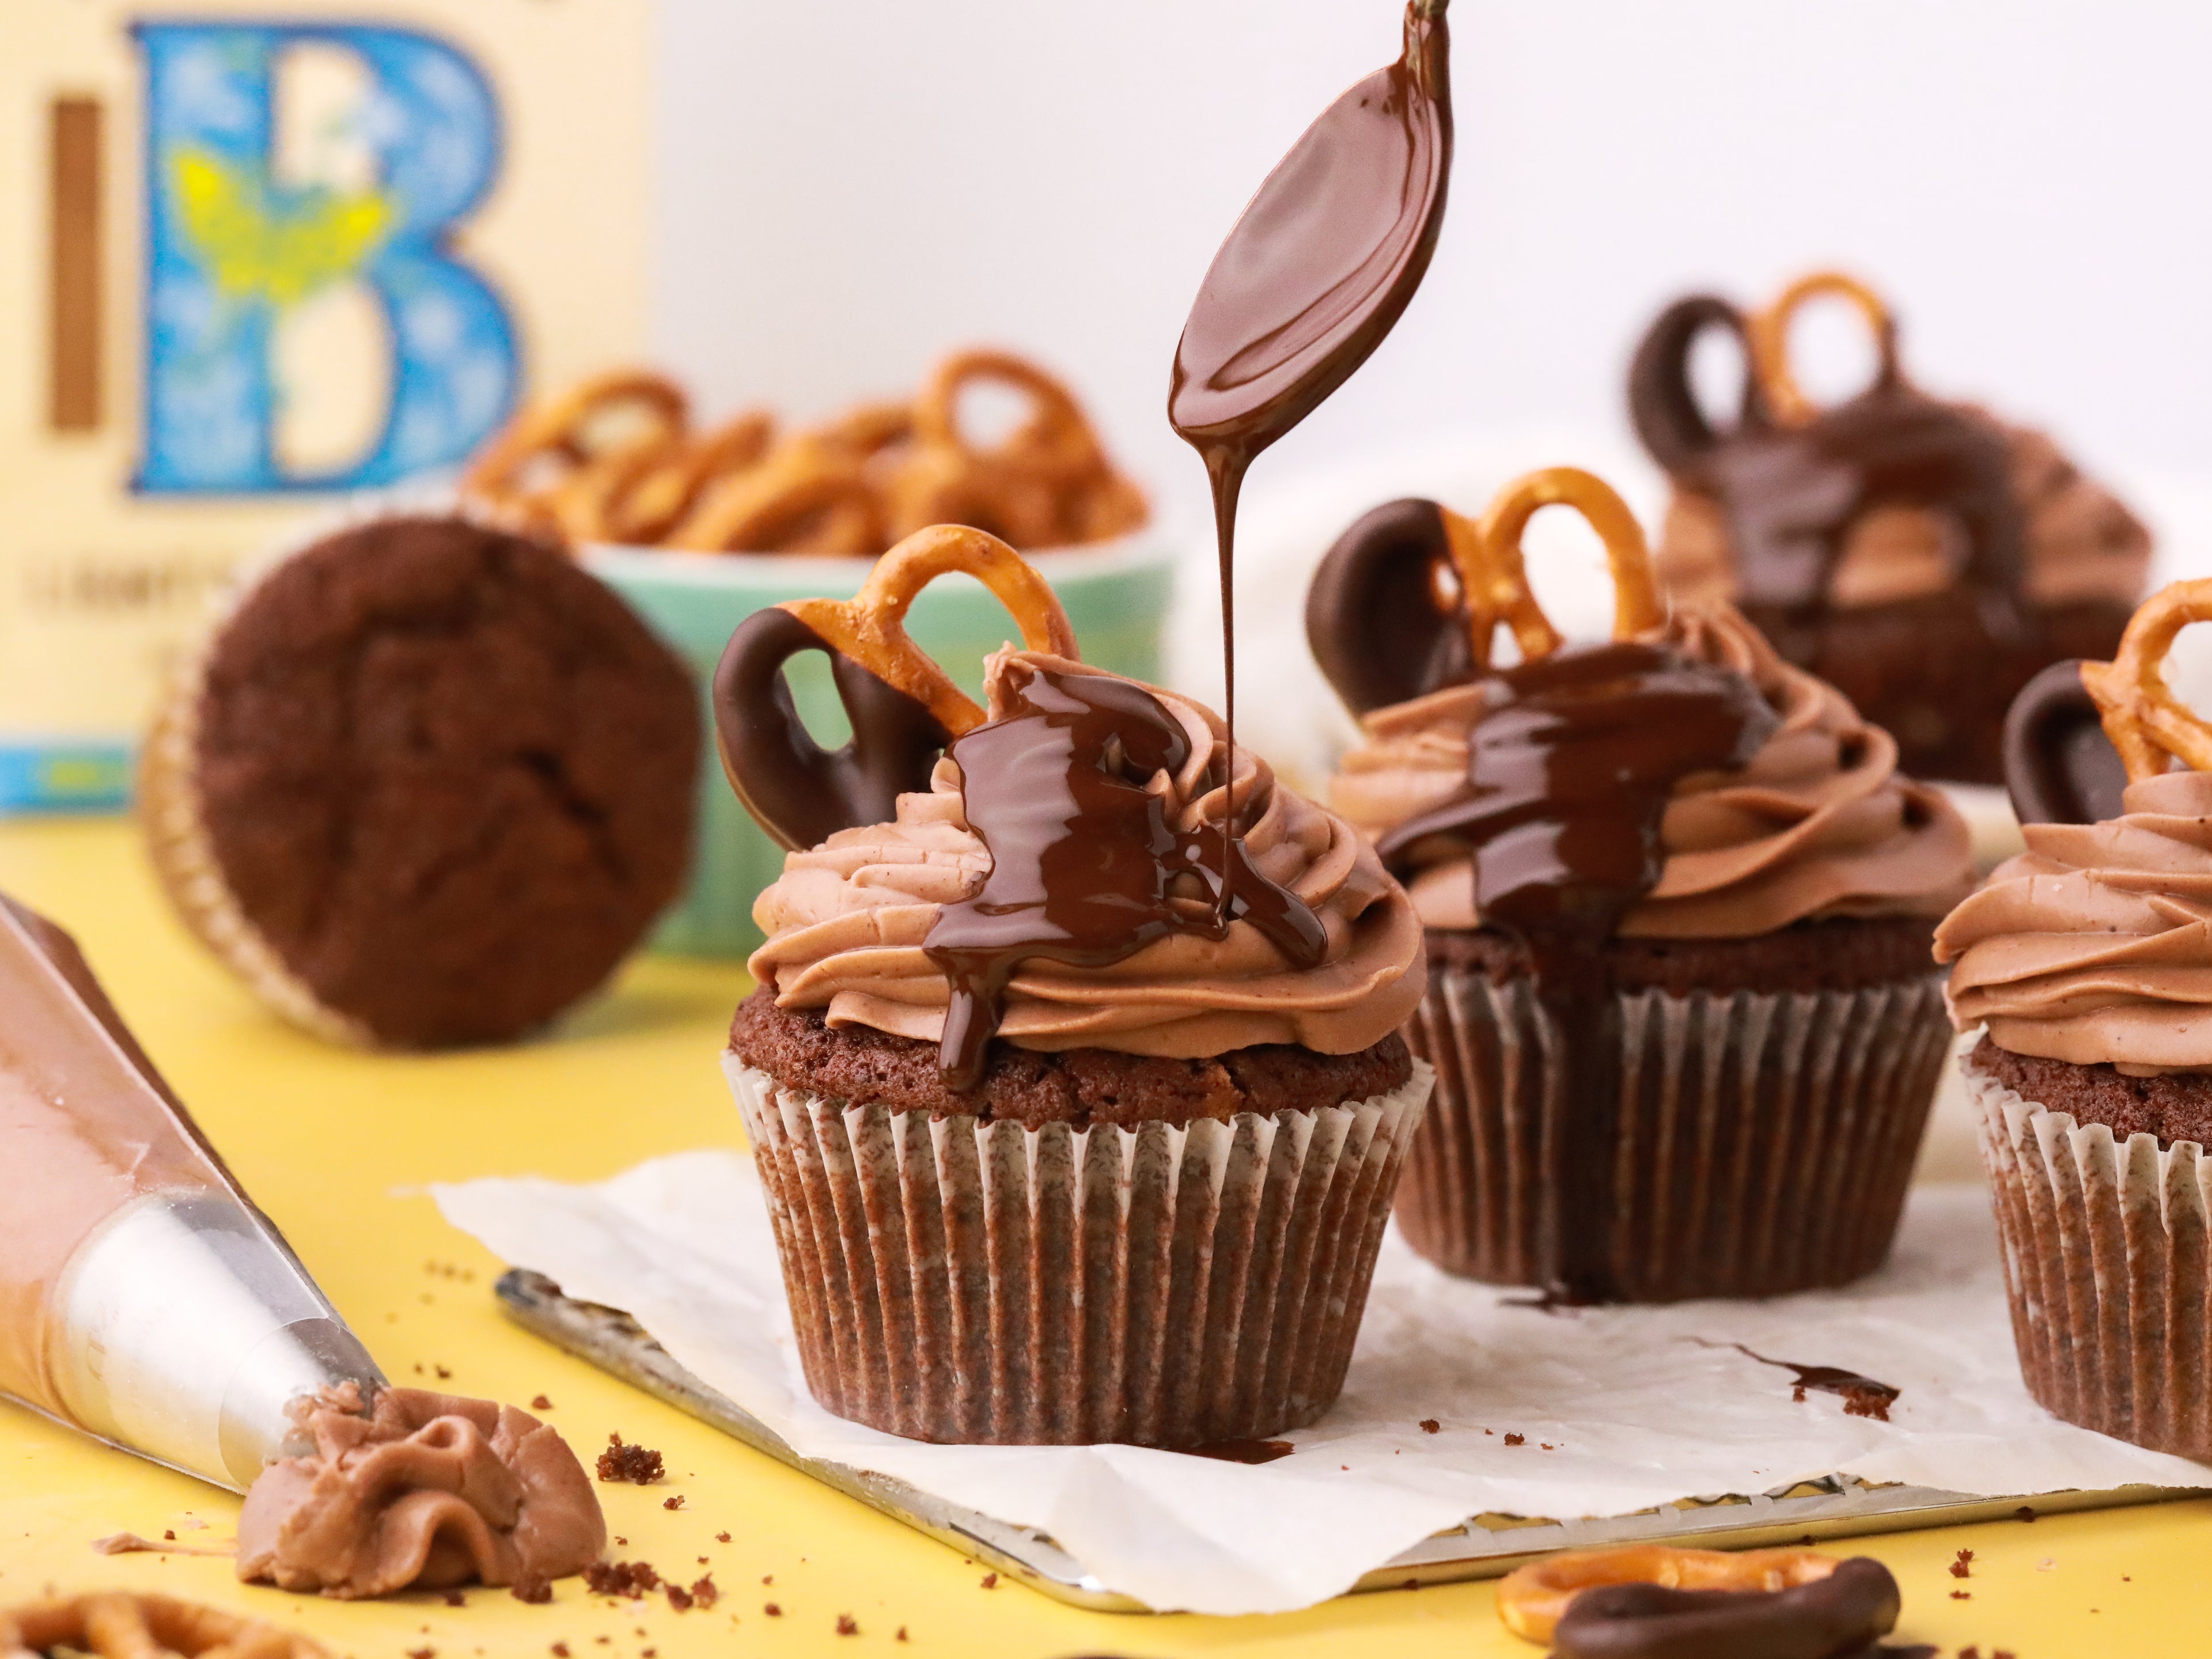 Chocolate drizzled on top of cupcakes